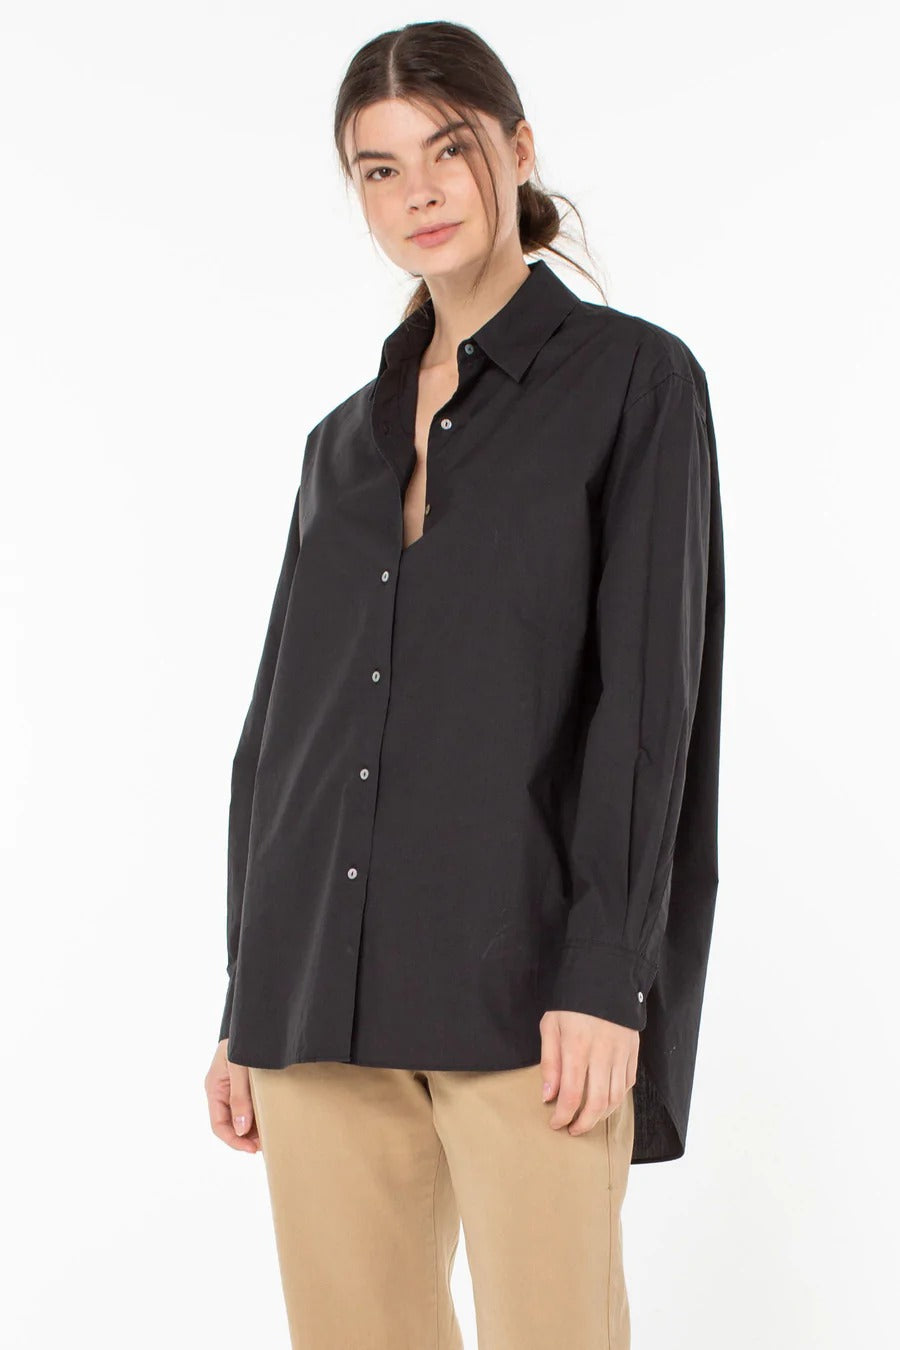 The Great White Oversized Button Up in Black